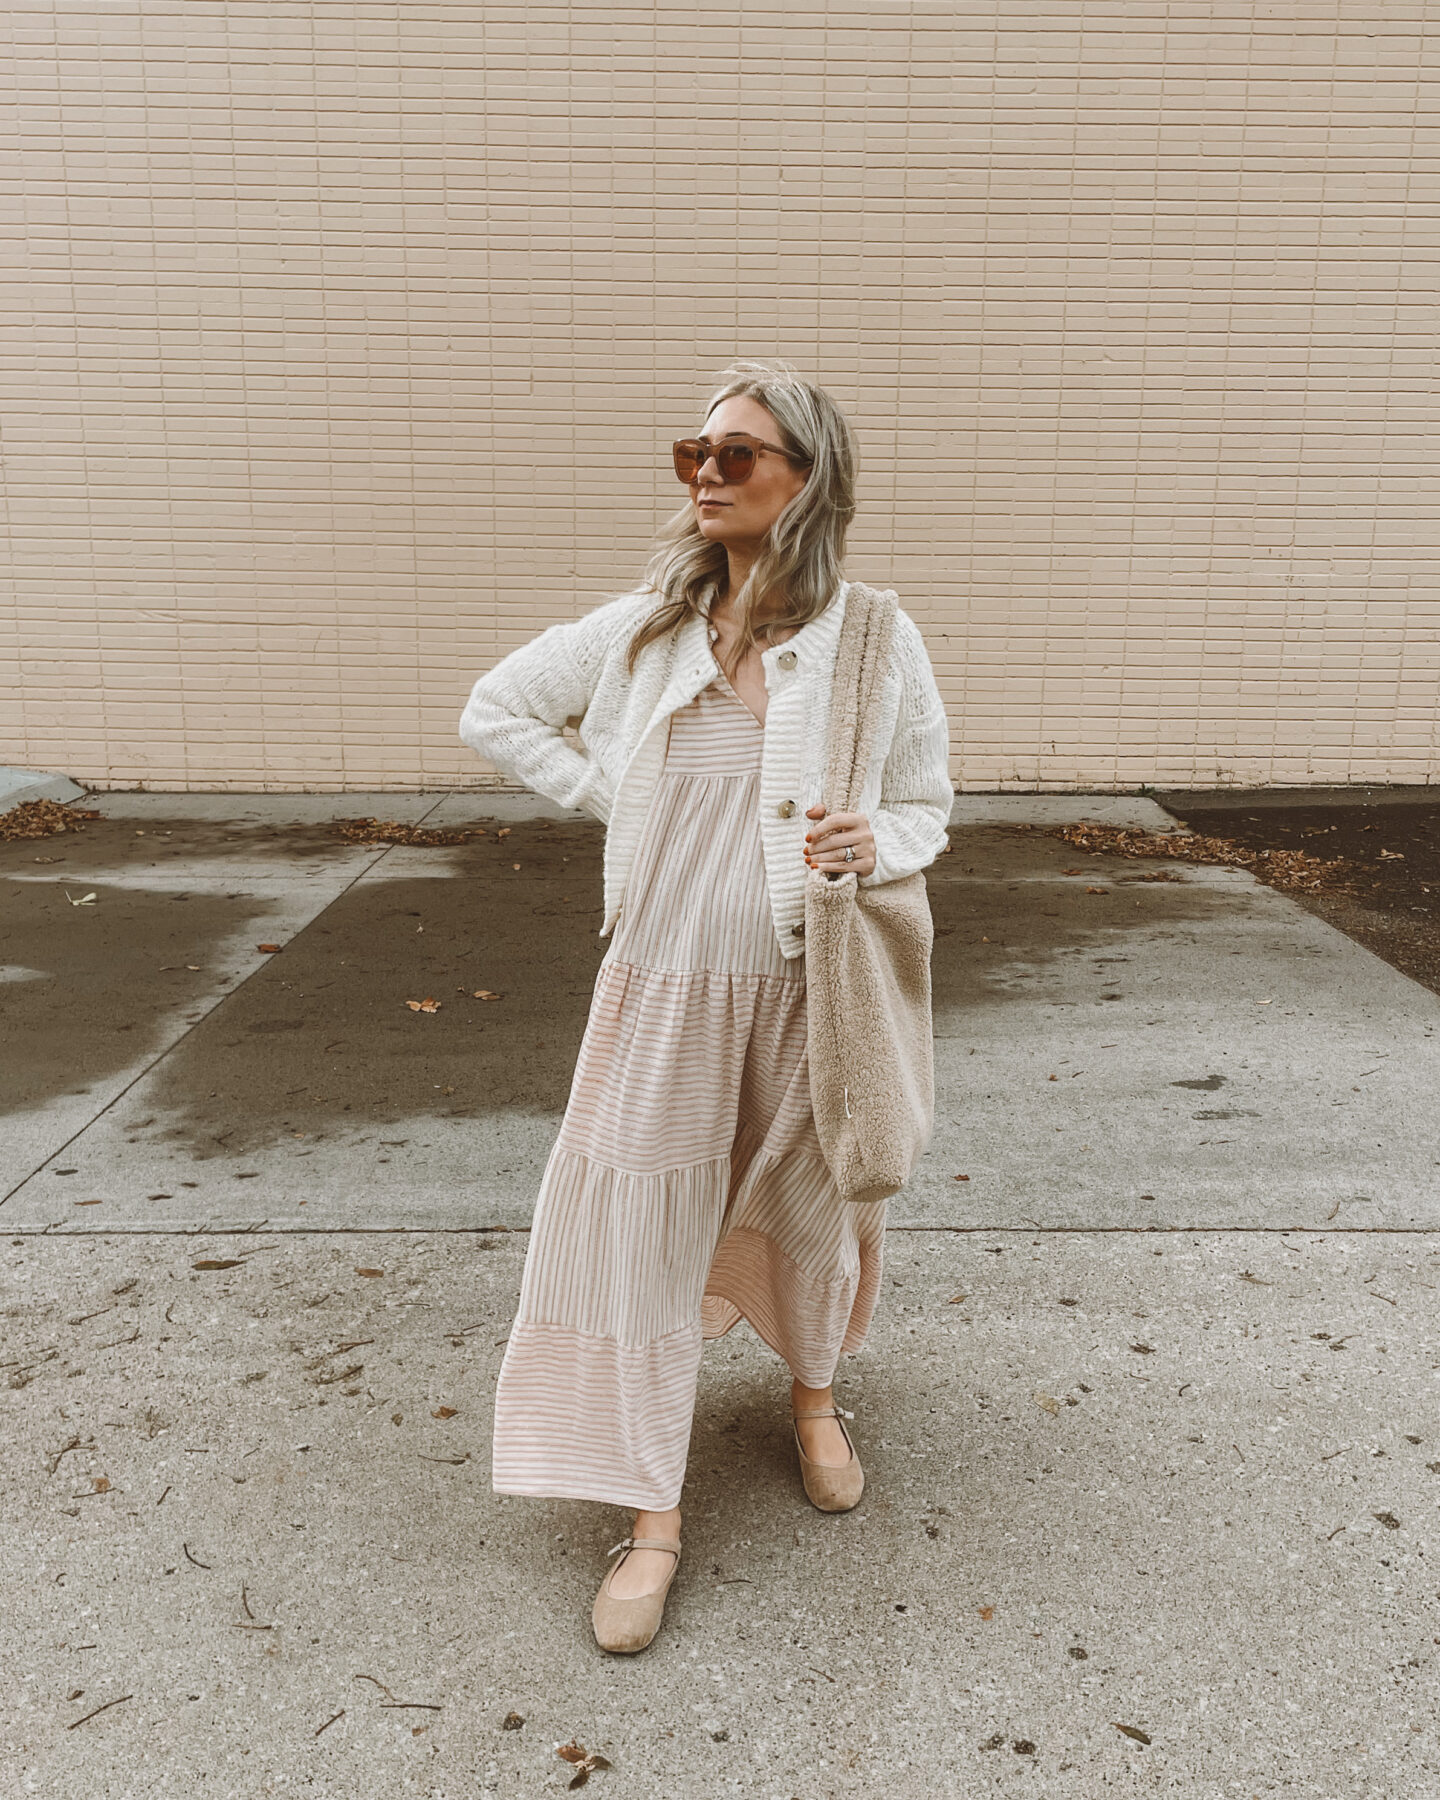 Karin Emily wears a fall maxi dress with an everlane cropped cardigan, velvet Mary Jane's, oversized sunglasses and a sherpa bag